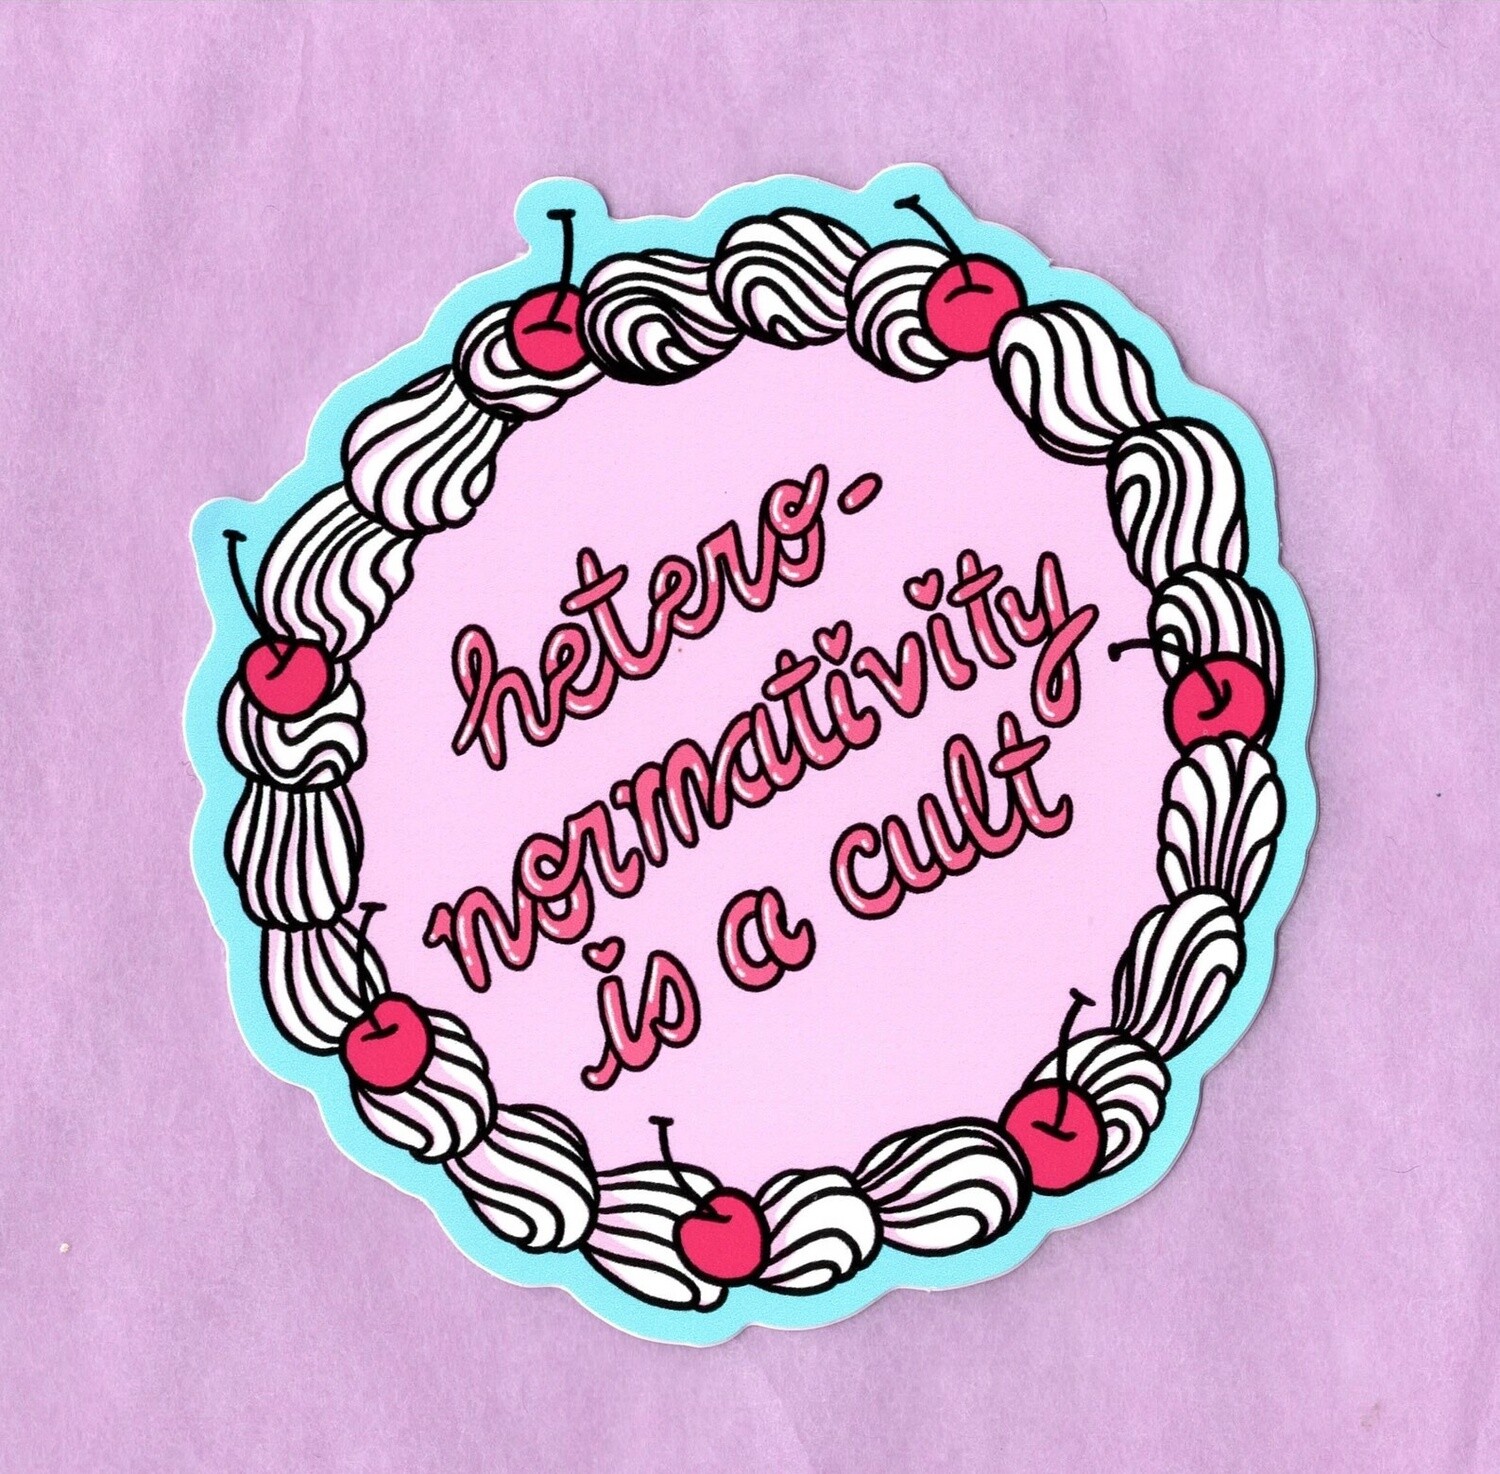 "Heteronormativity Is A Cult" Cake Sticker